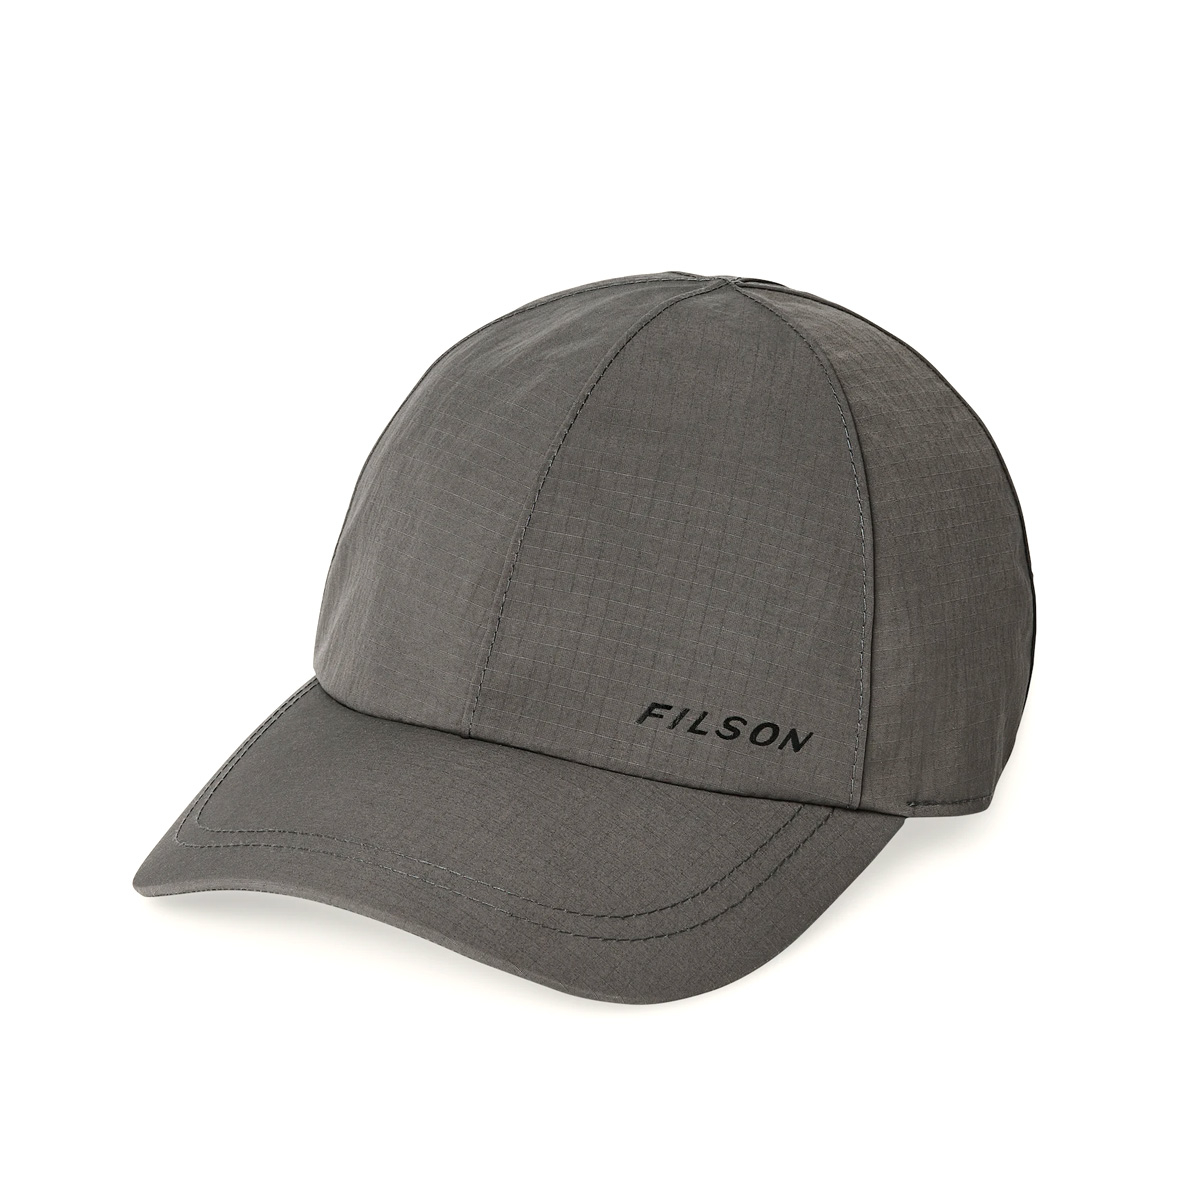 Filson Swiftwater Rain Cap Raven, nylon ripstop fabric with a waterproof/breathable membrane